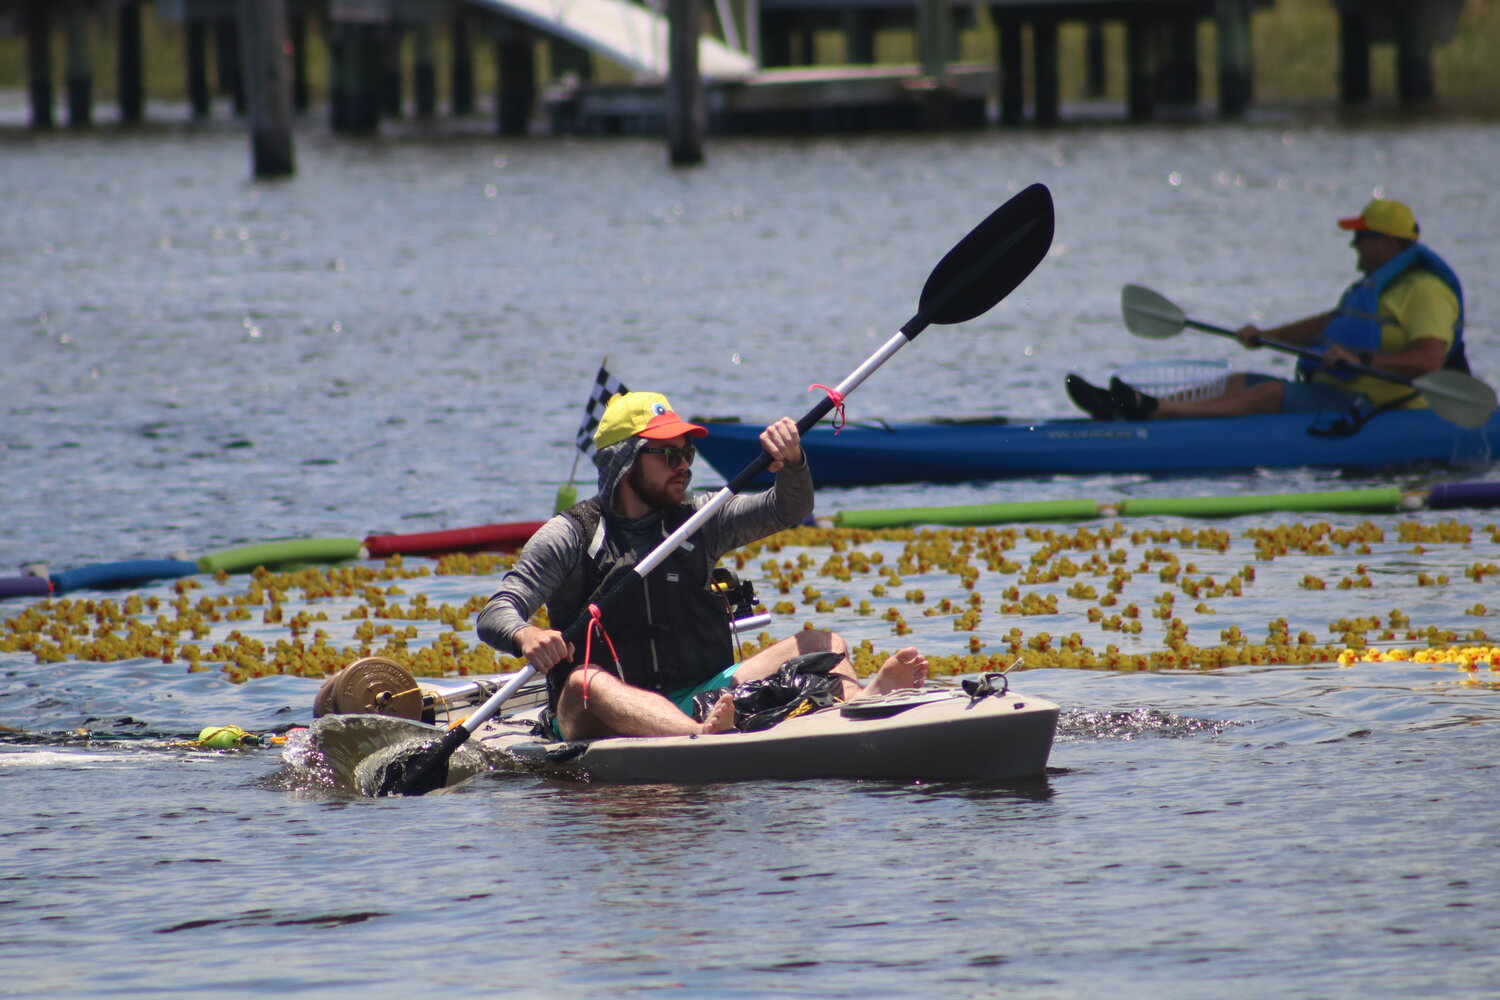 Several kayakers converge to collect the ducks after the race.